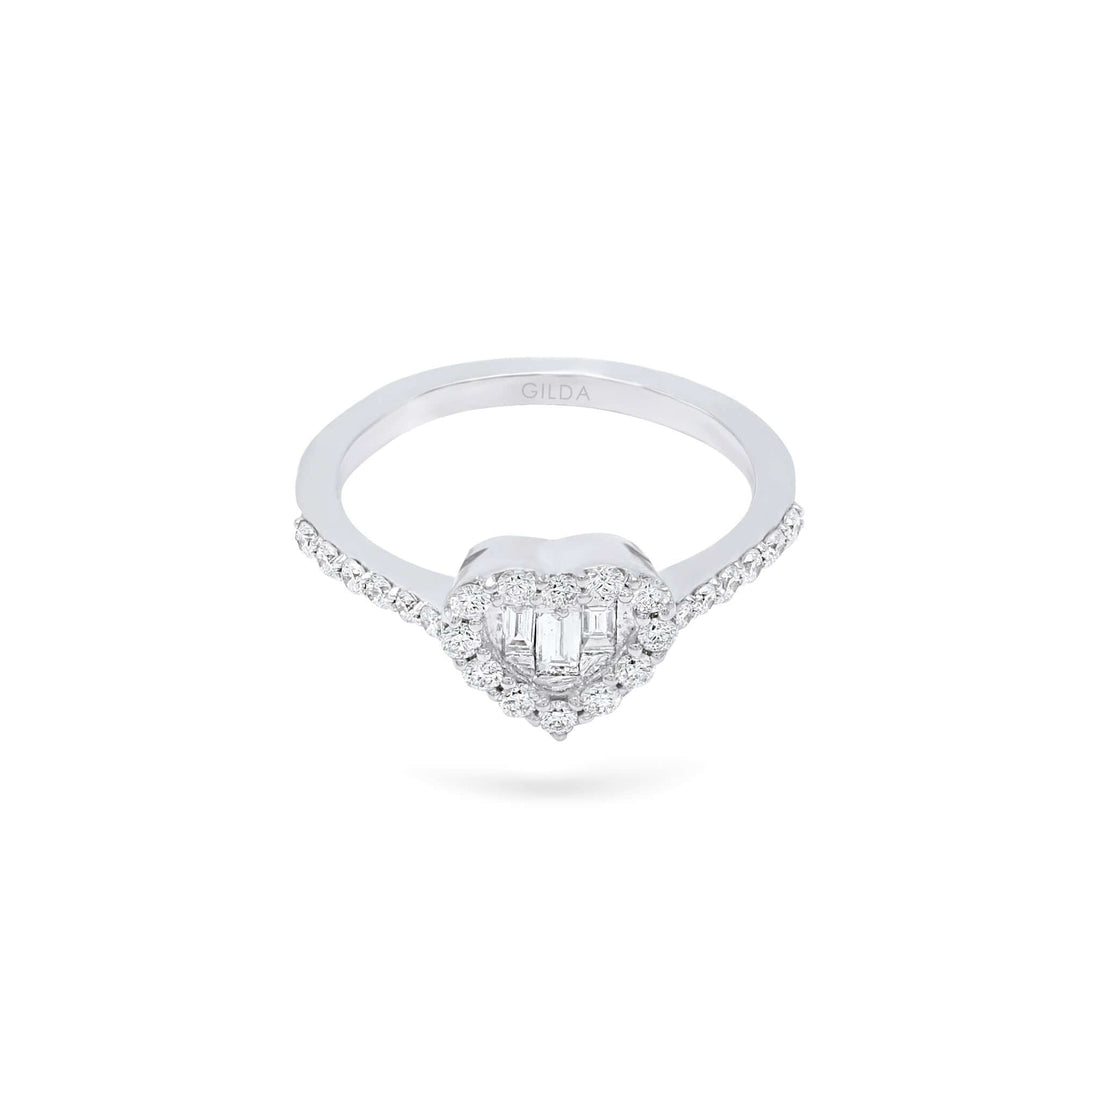 Jewelry Hearts | Diamond Ring | 0.56 Cts. | 14K Gold - ring Zengoda Shop online from Artisan Brands